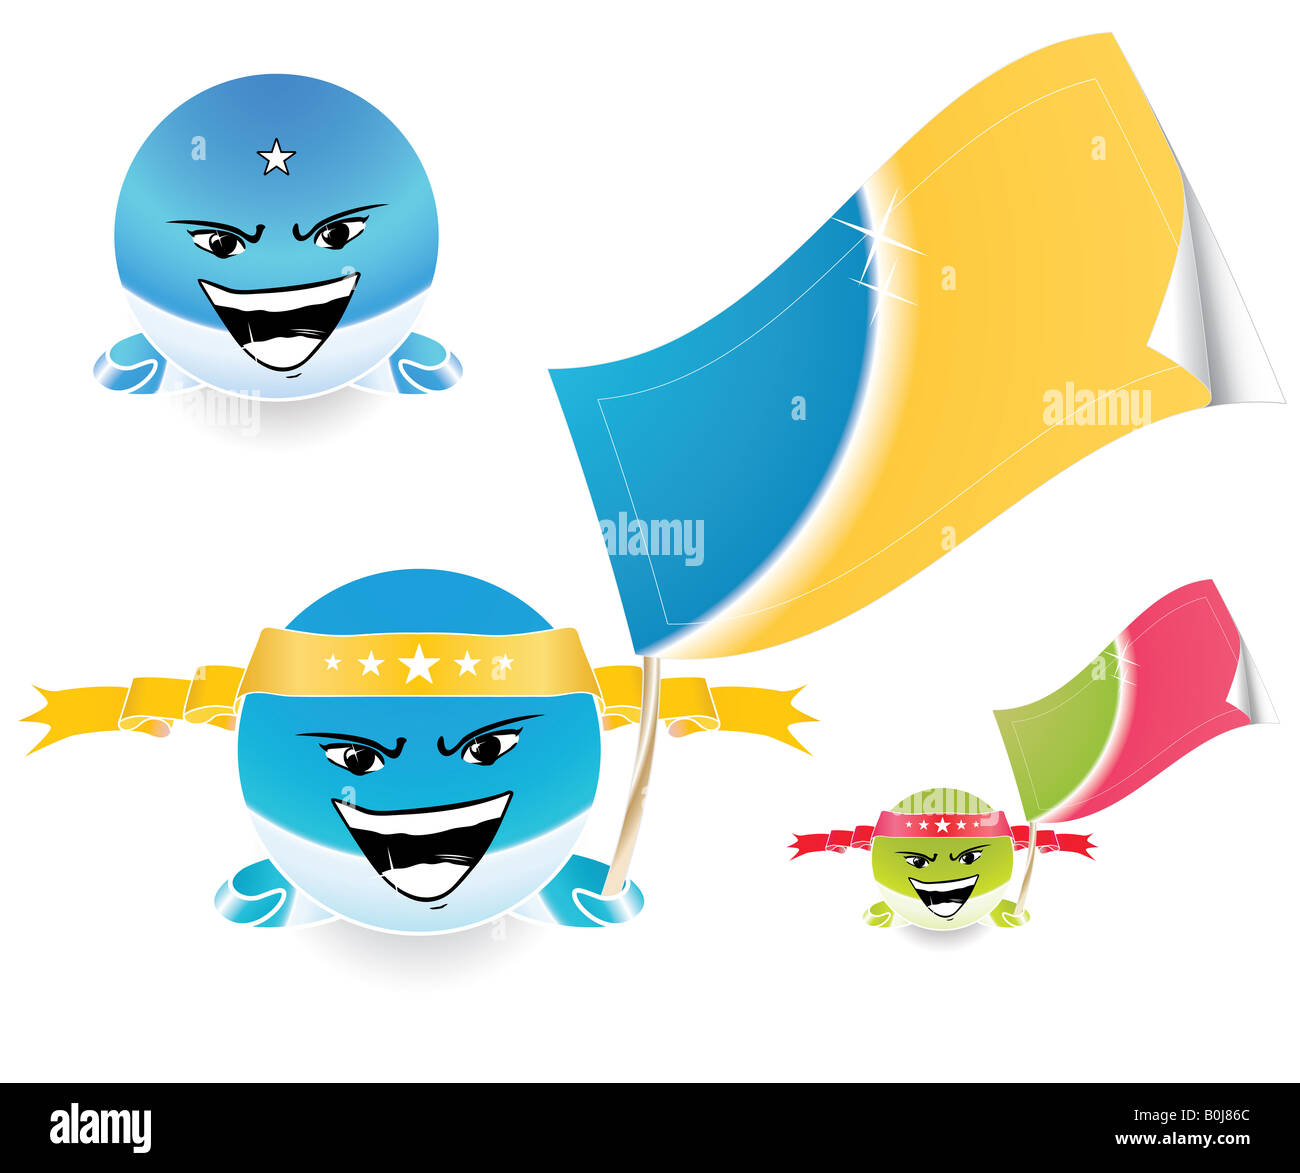 Vector illustration of an anime style happy emoticon face with a joyful expression and a retail tag flag in the hand Stock Photo